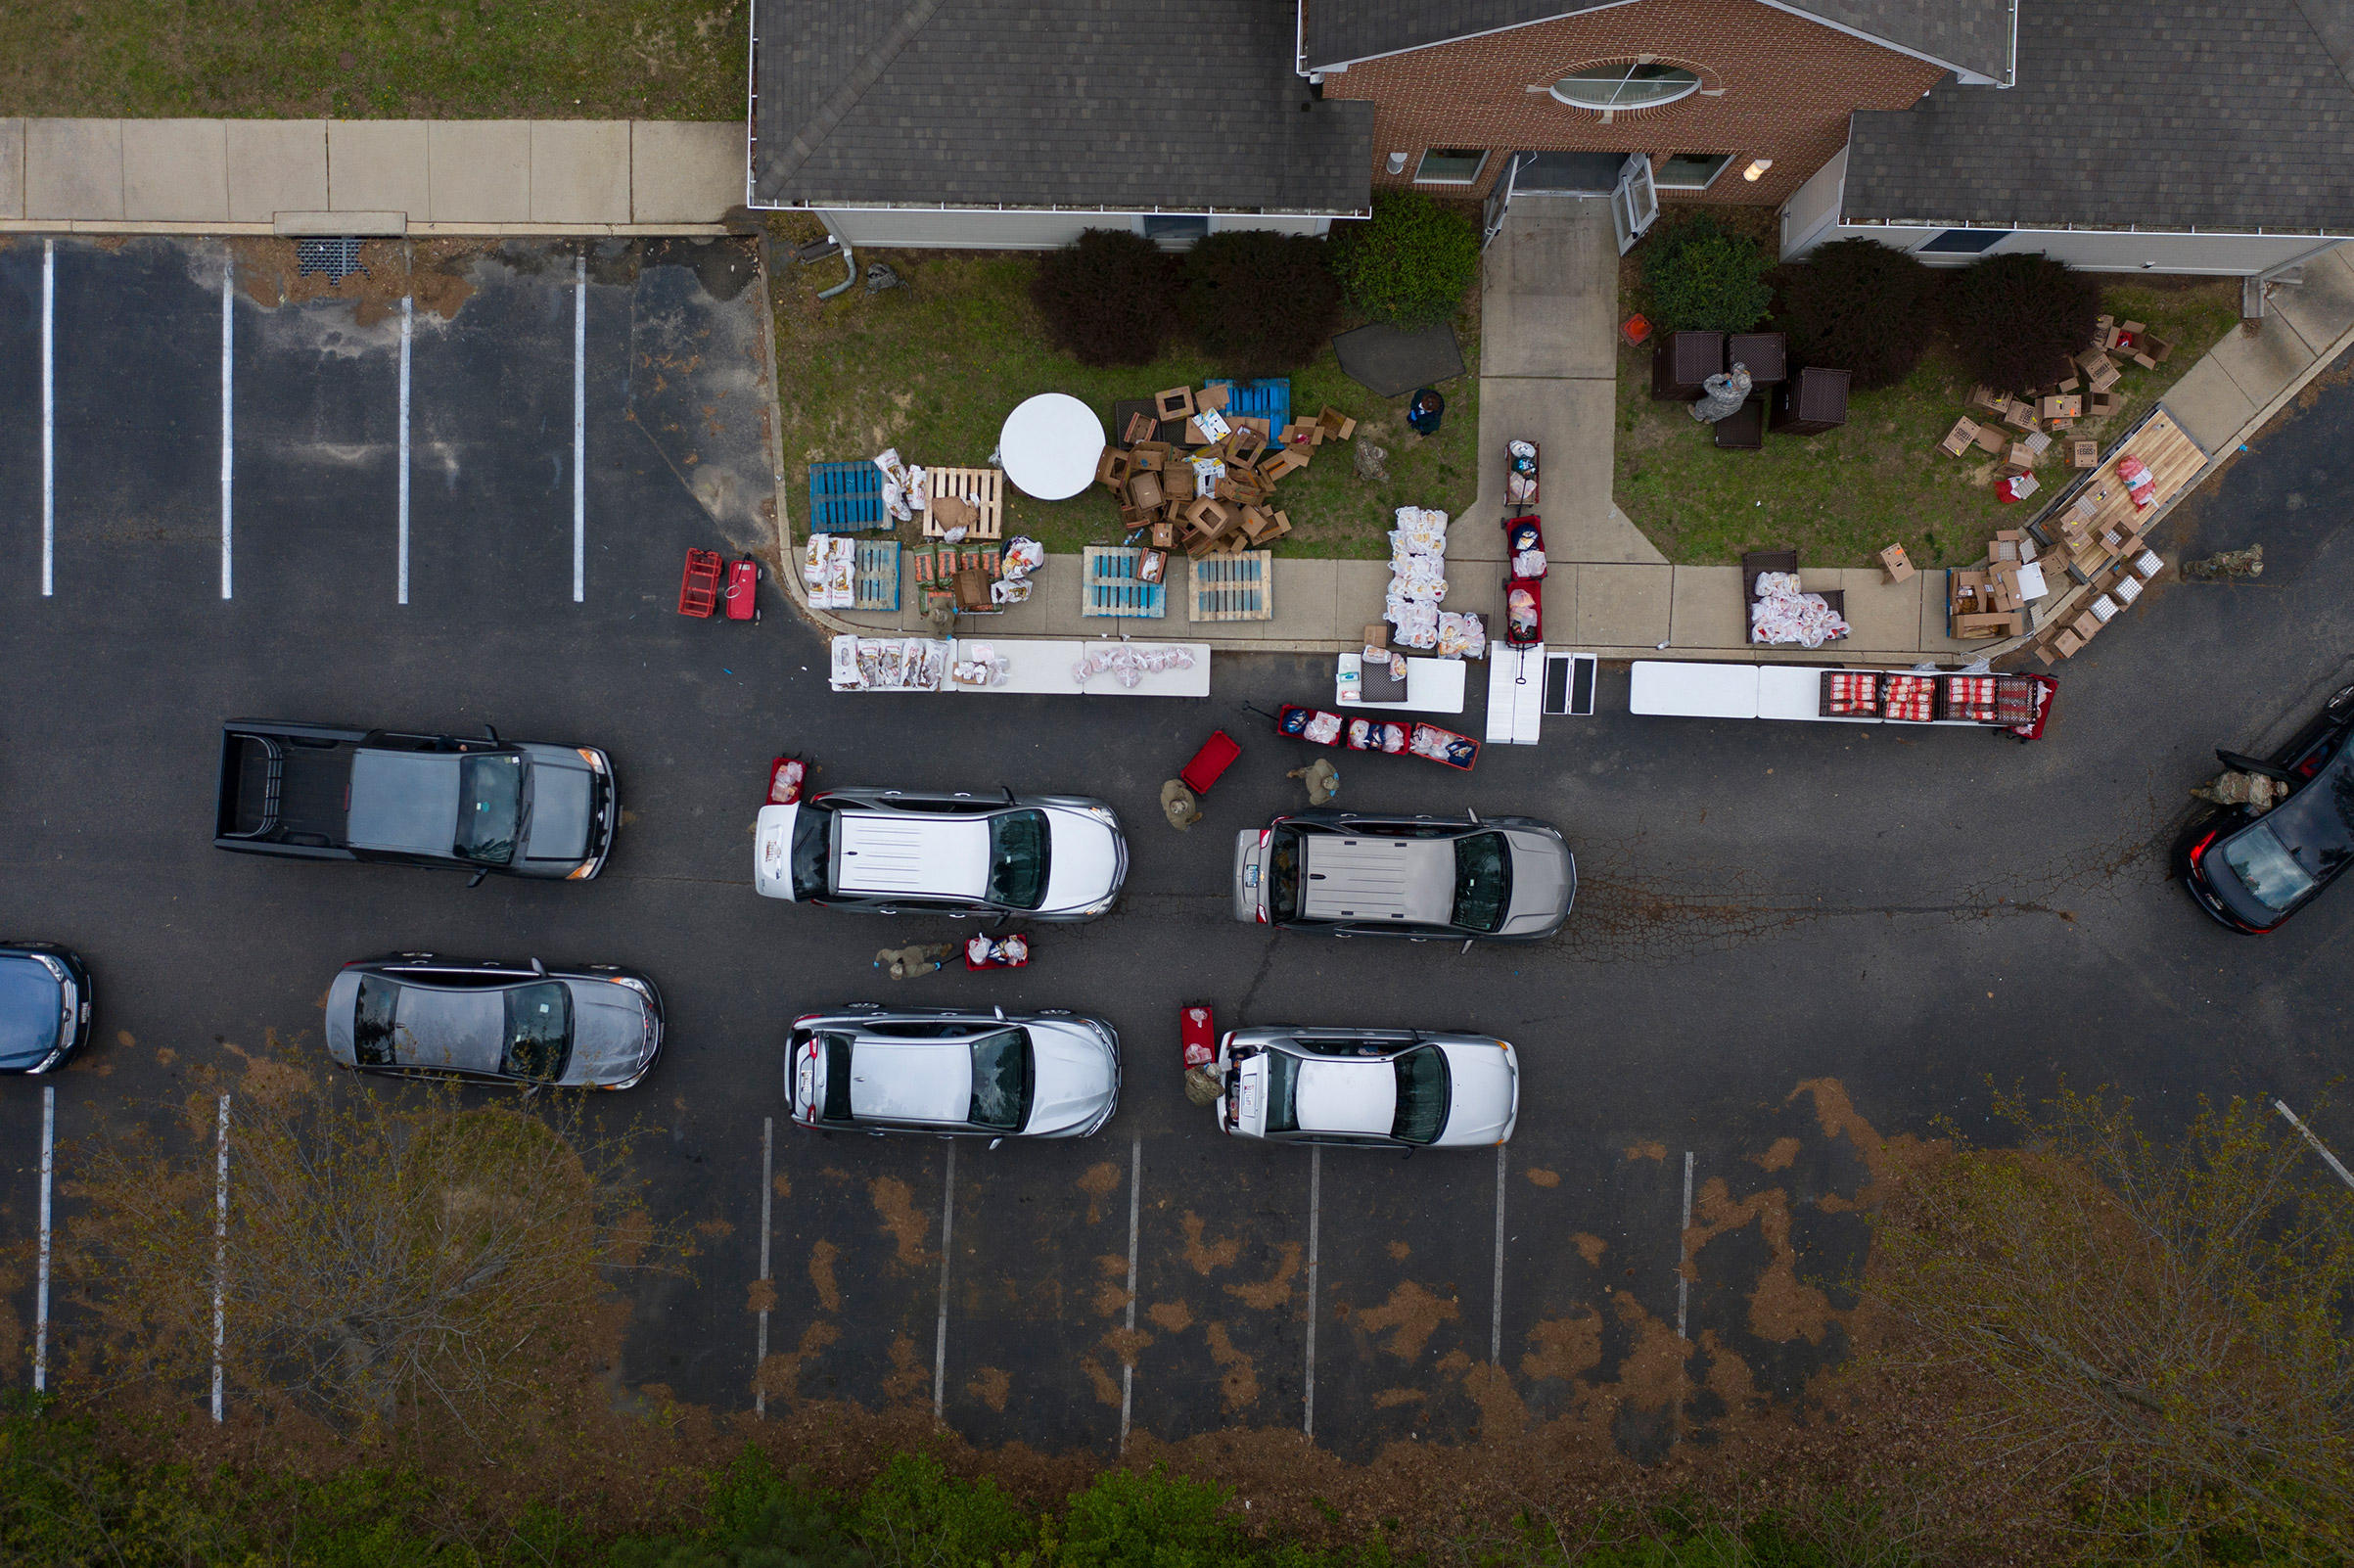 Overview of a food distribution site during the stay-at-home order in Centreville, Md., on April 17. (Peter van Agtmael—Magnum Photos for TIME)